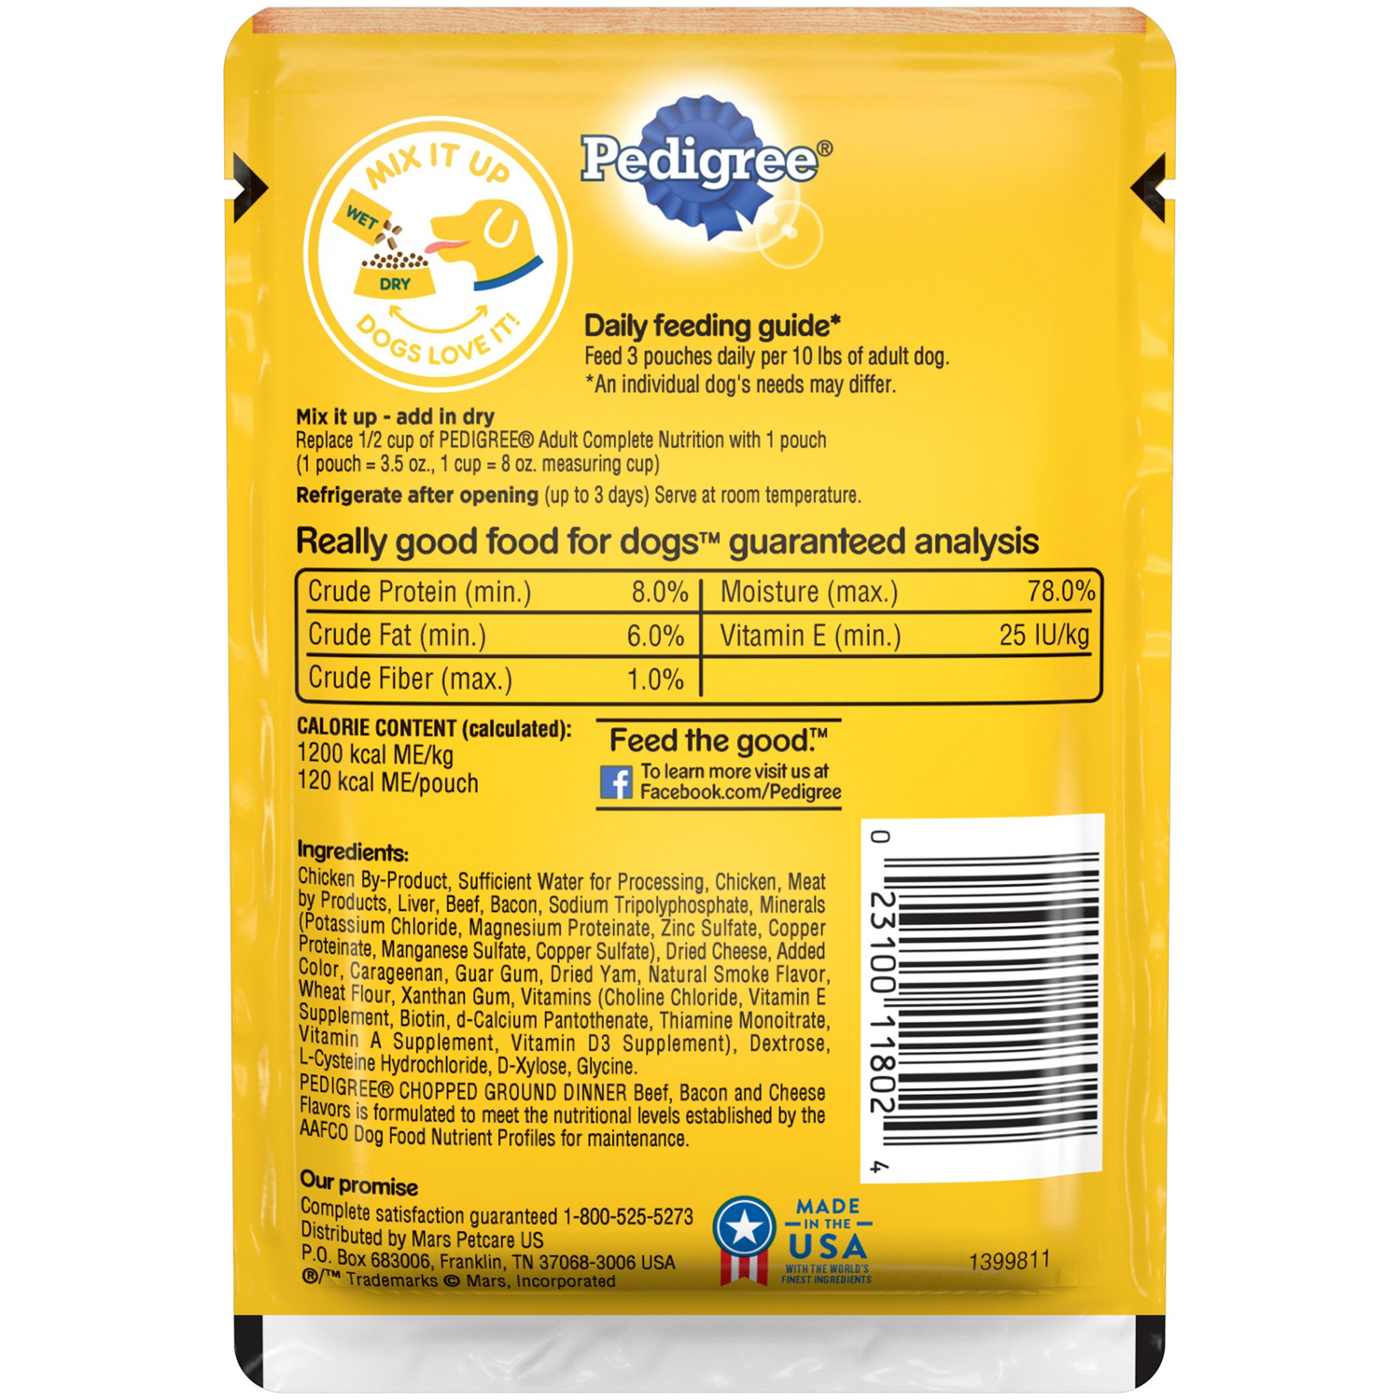 Pedigree Chopped Dinner Beef Bacon & Cheese Wet Dog Food; image 5 of 5